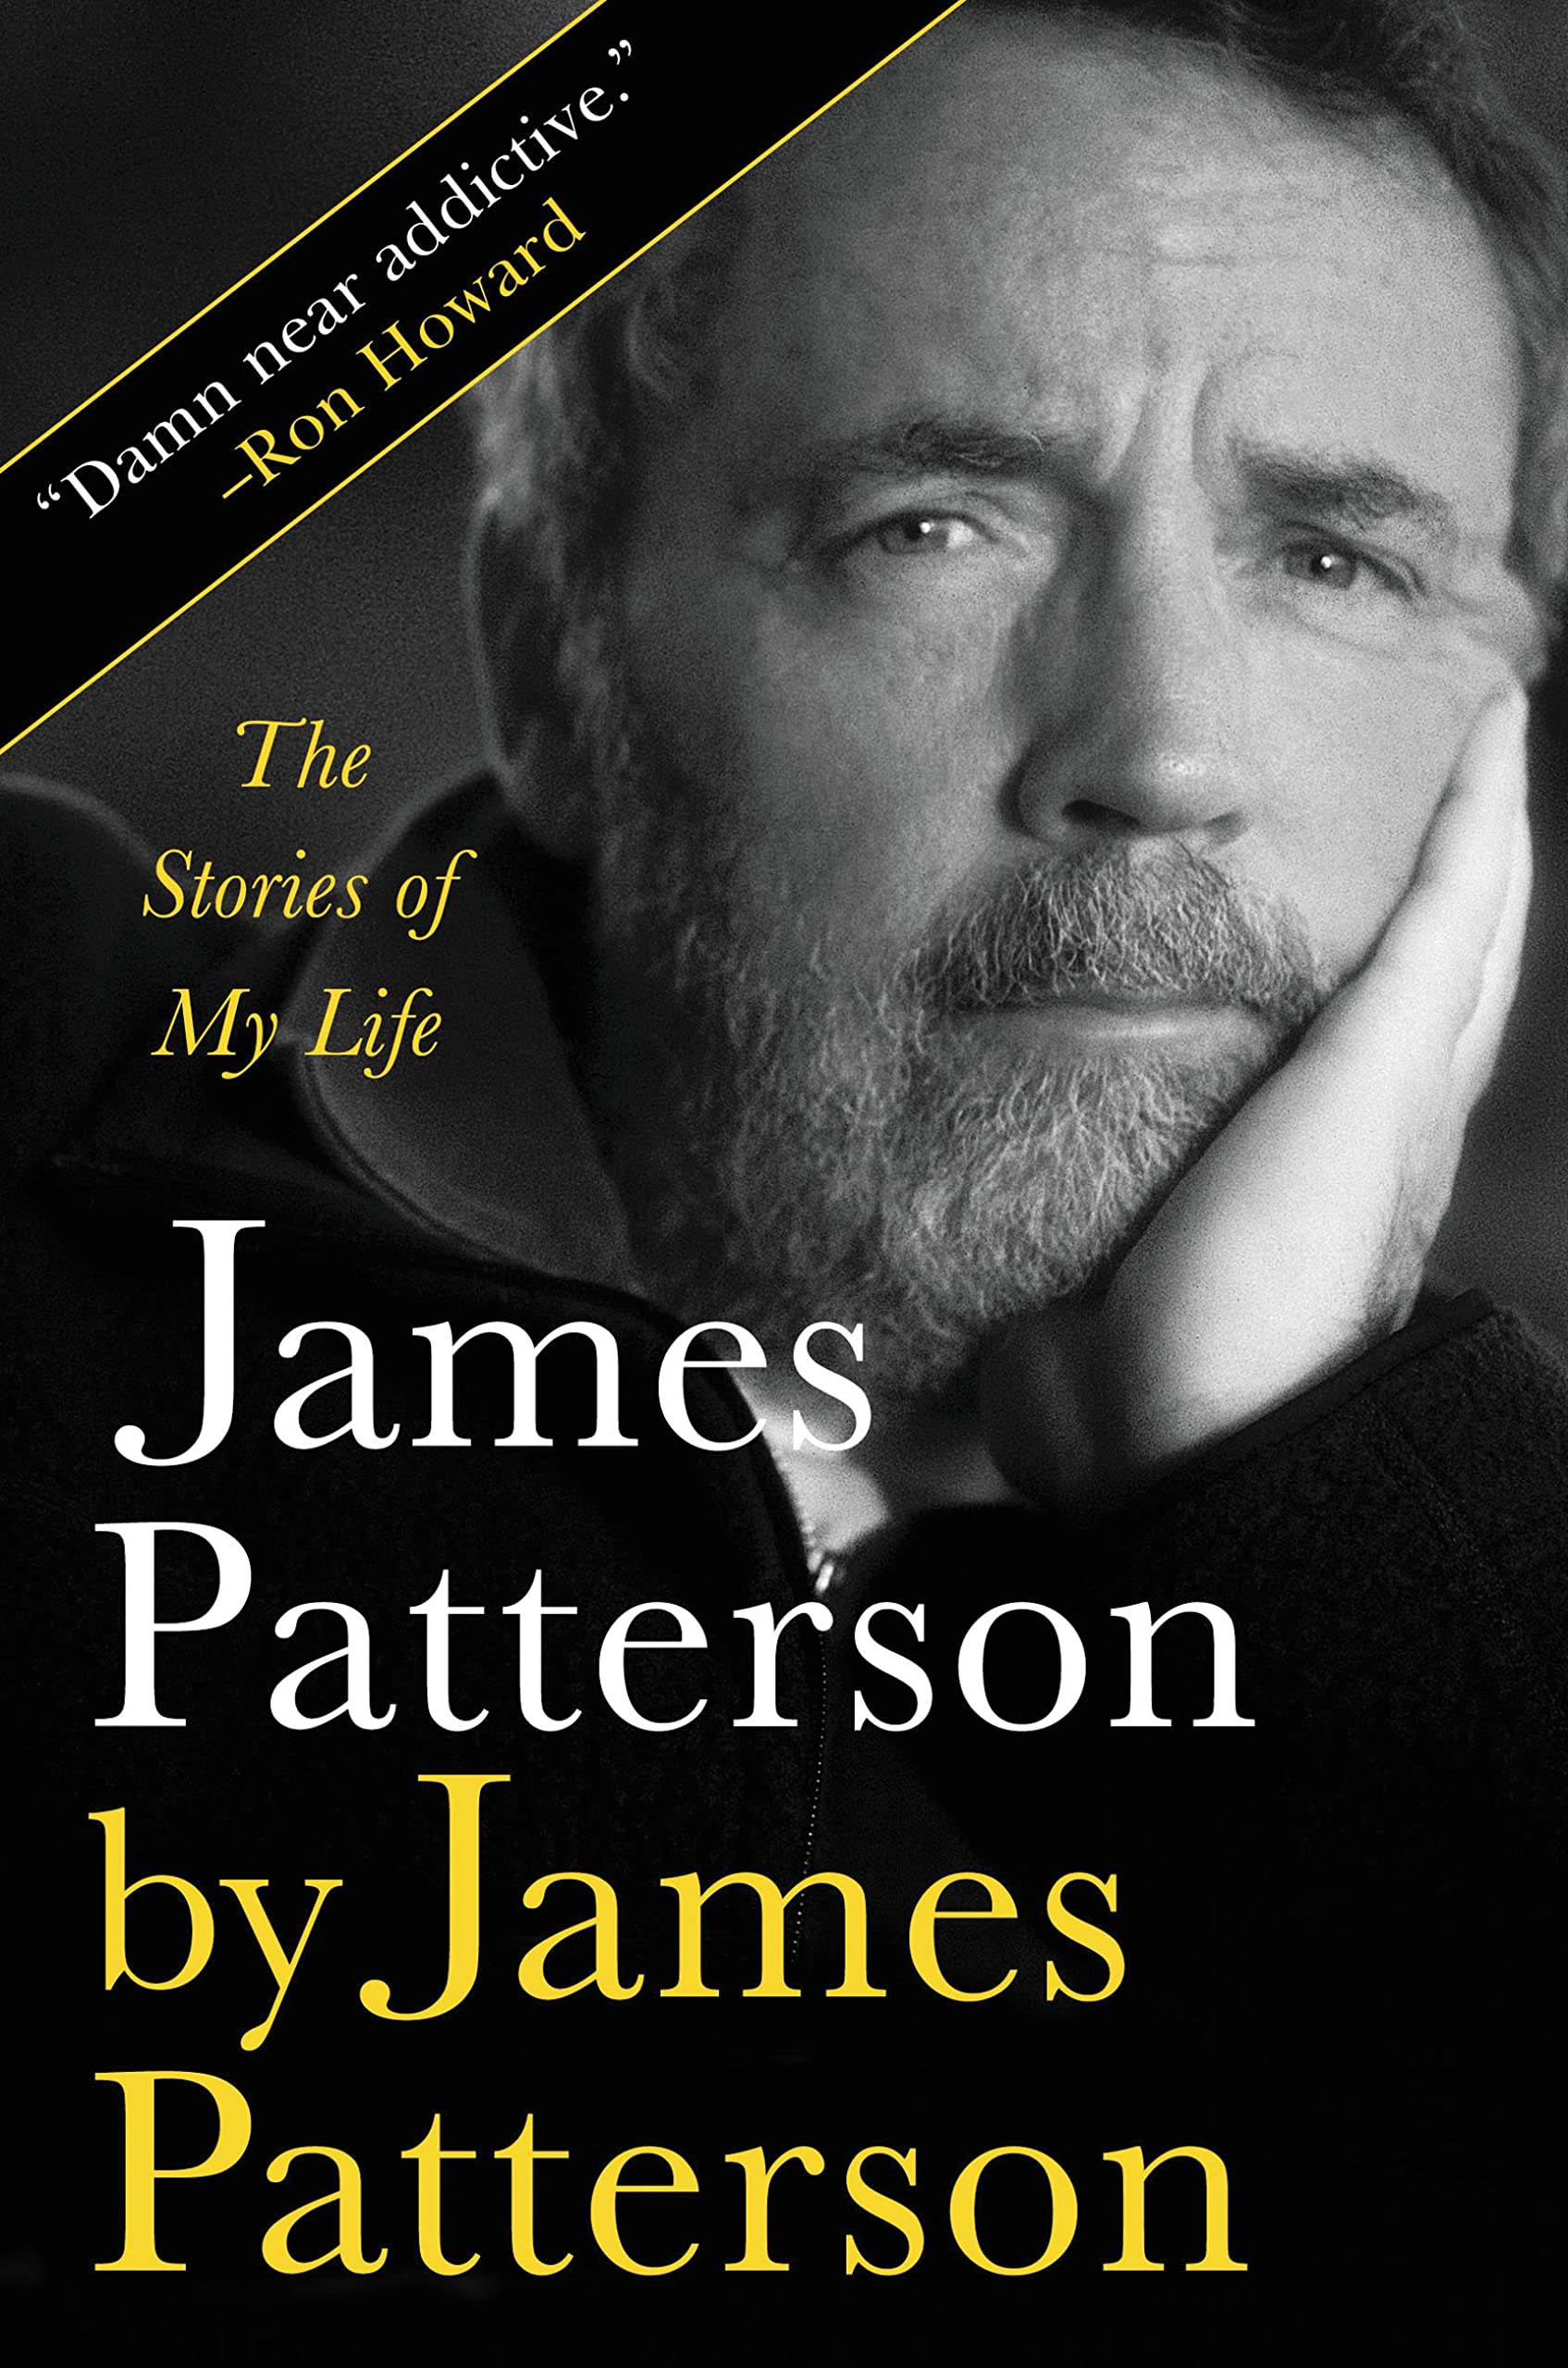 Image for "James Patterson by James Patterson"